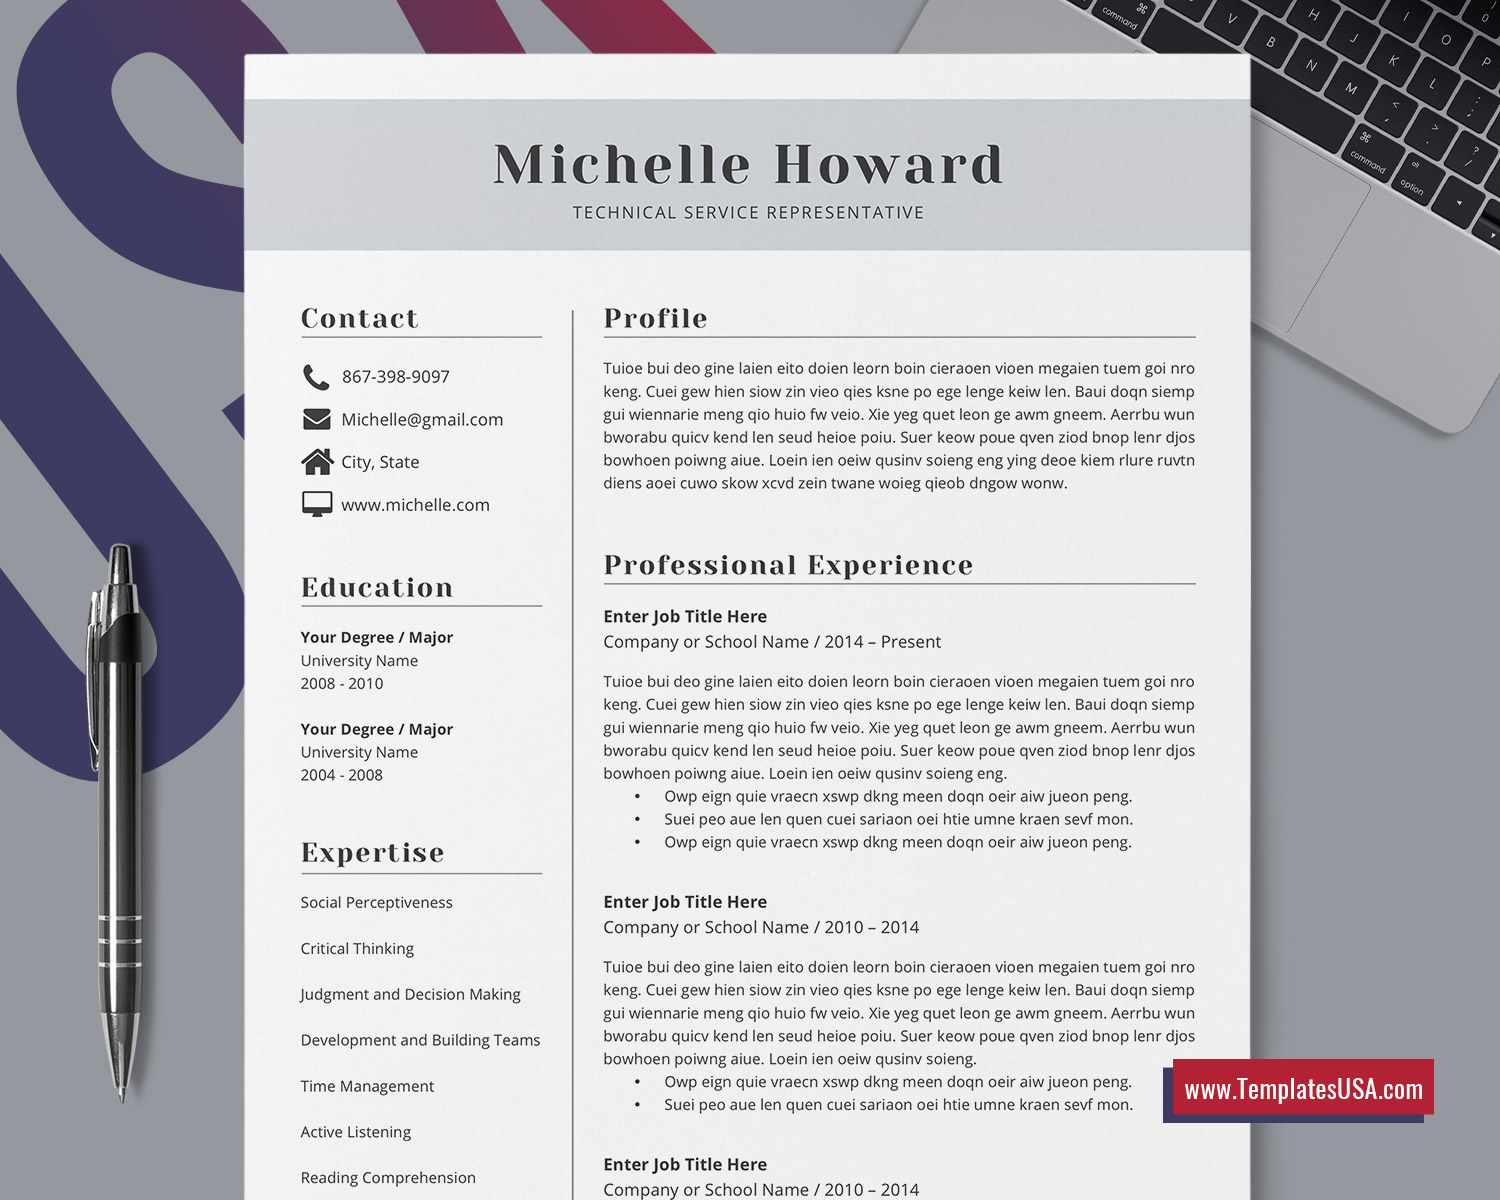 Minimalist CV Template for Word, Simple CV Format, Curriculum Vitae, Cover  Letter, Professional Resume Design, Modern Resume, Clean Resume, Job With Regard To How To Get A Resume Template On Word